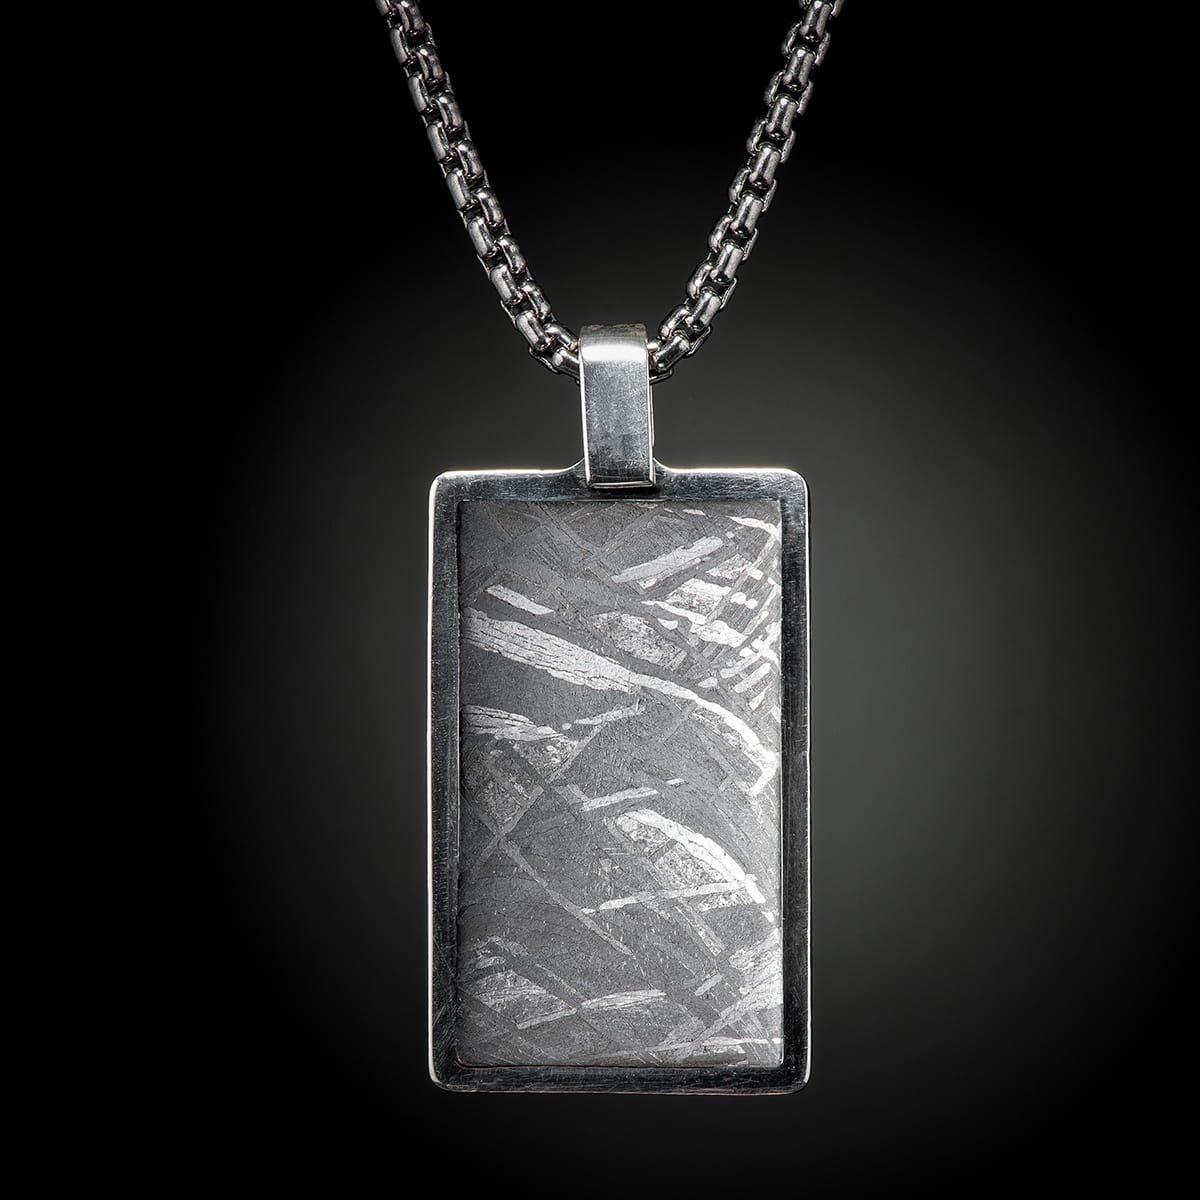 Men's Sterling Silver Meteorite Dog Tag Pendant and Chain by William Henry Studio